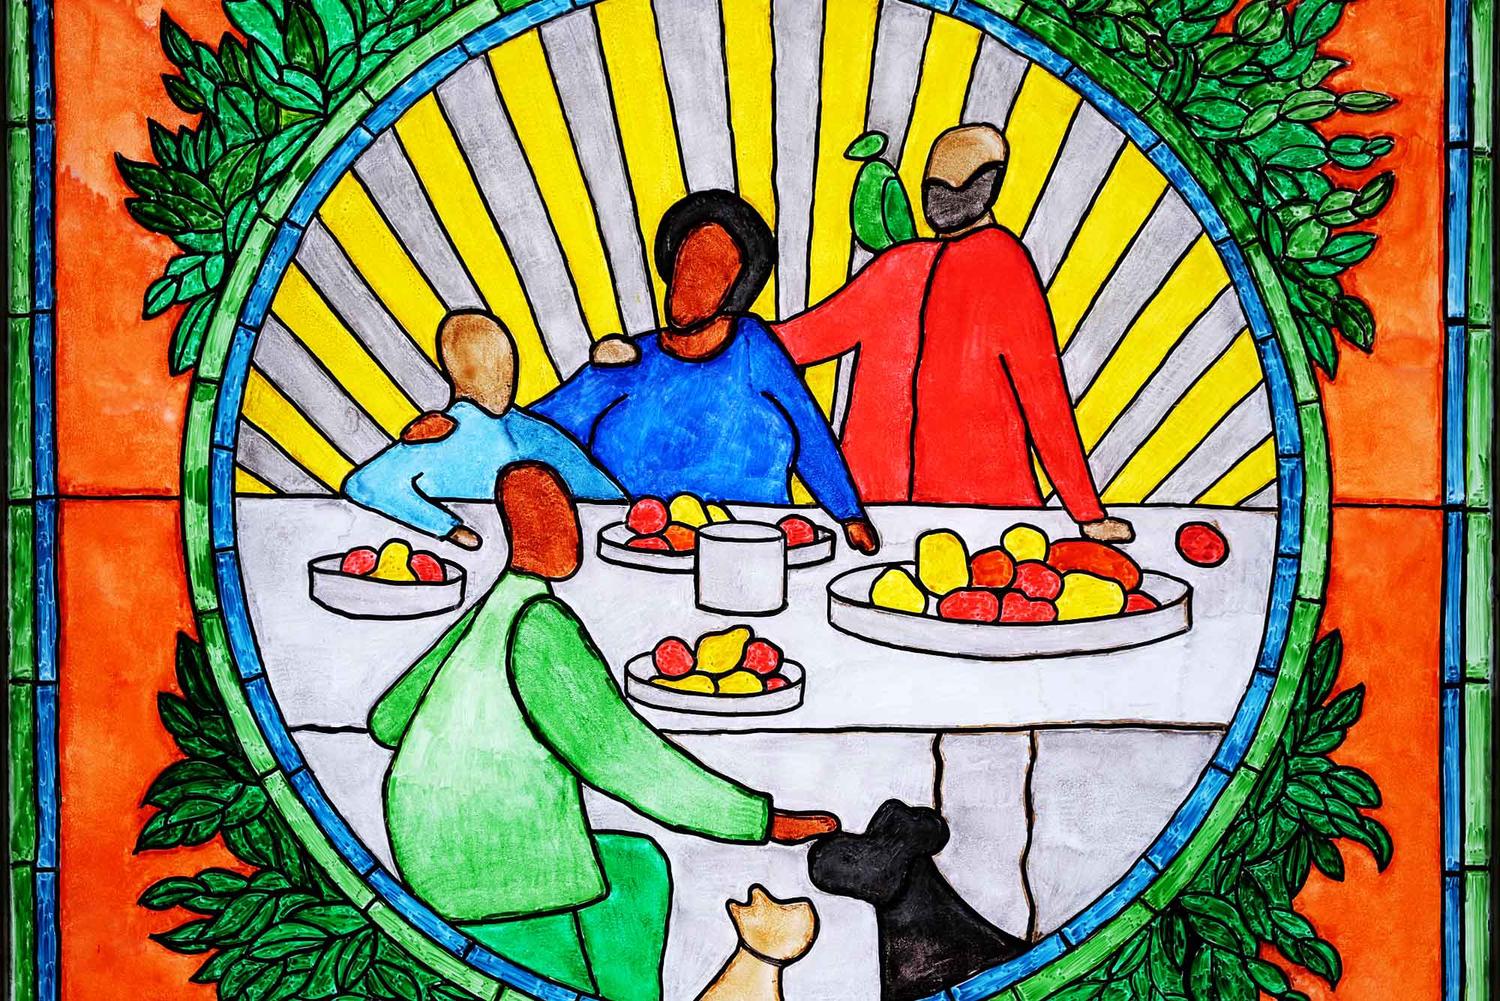 Orange panel detail: family around a table with fruits